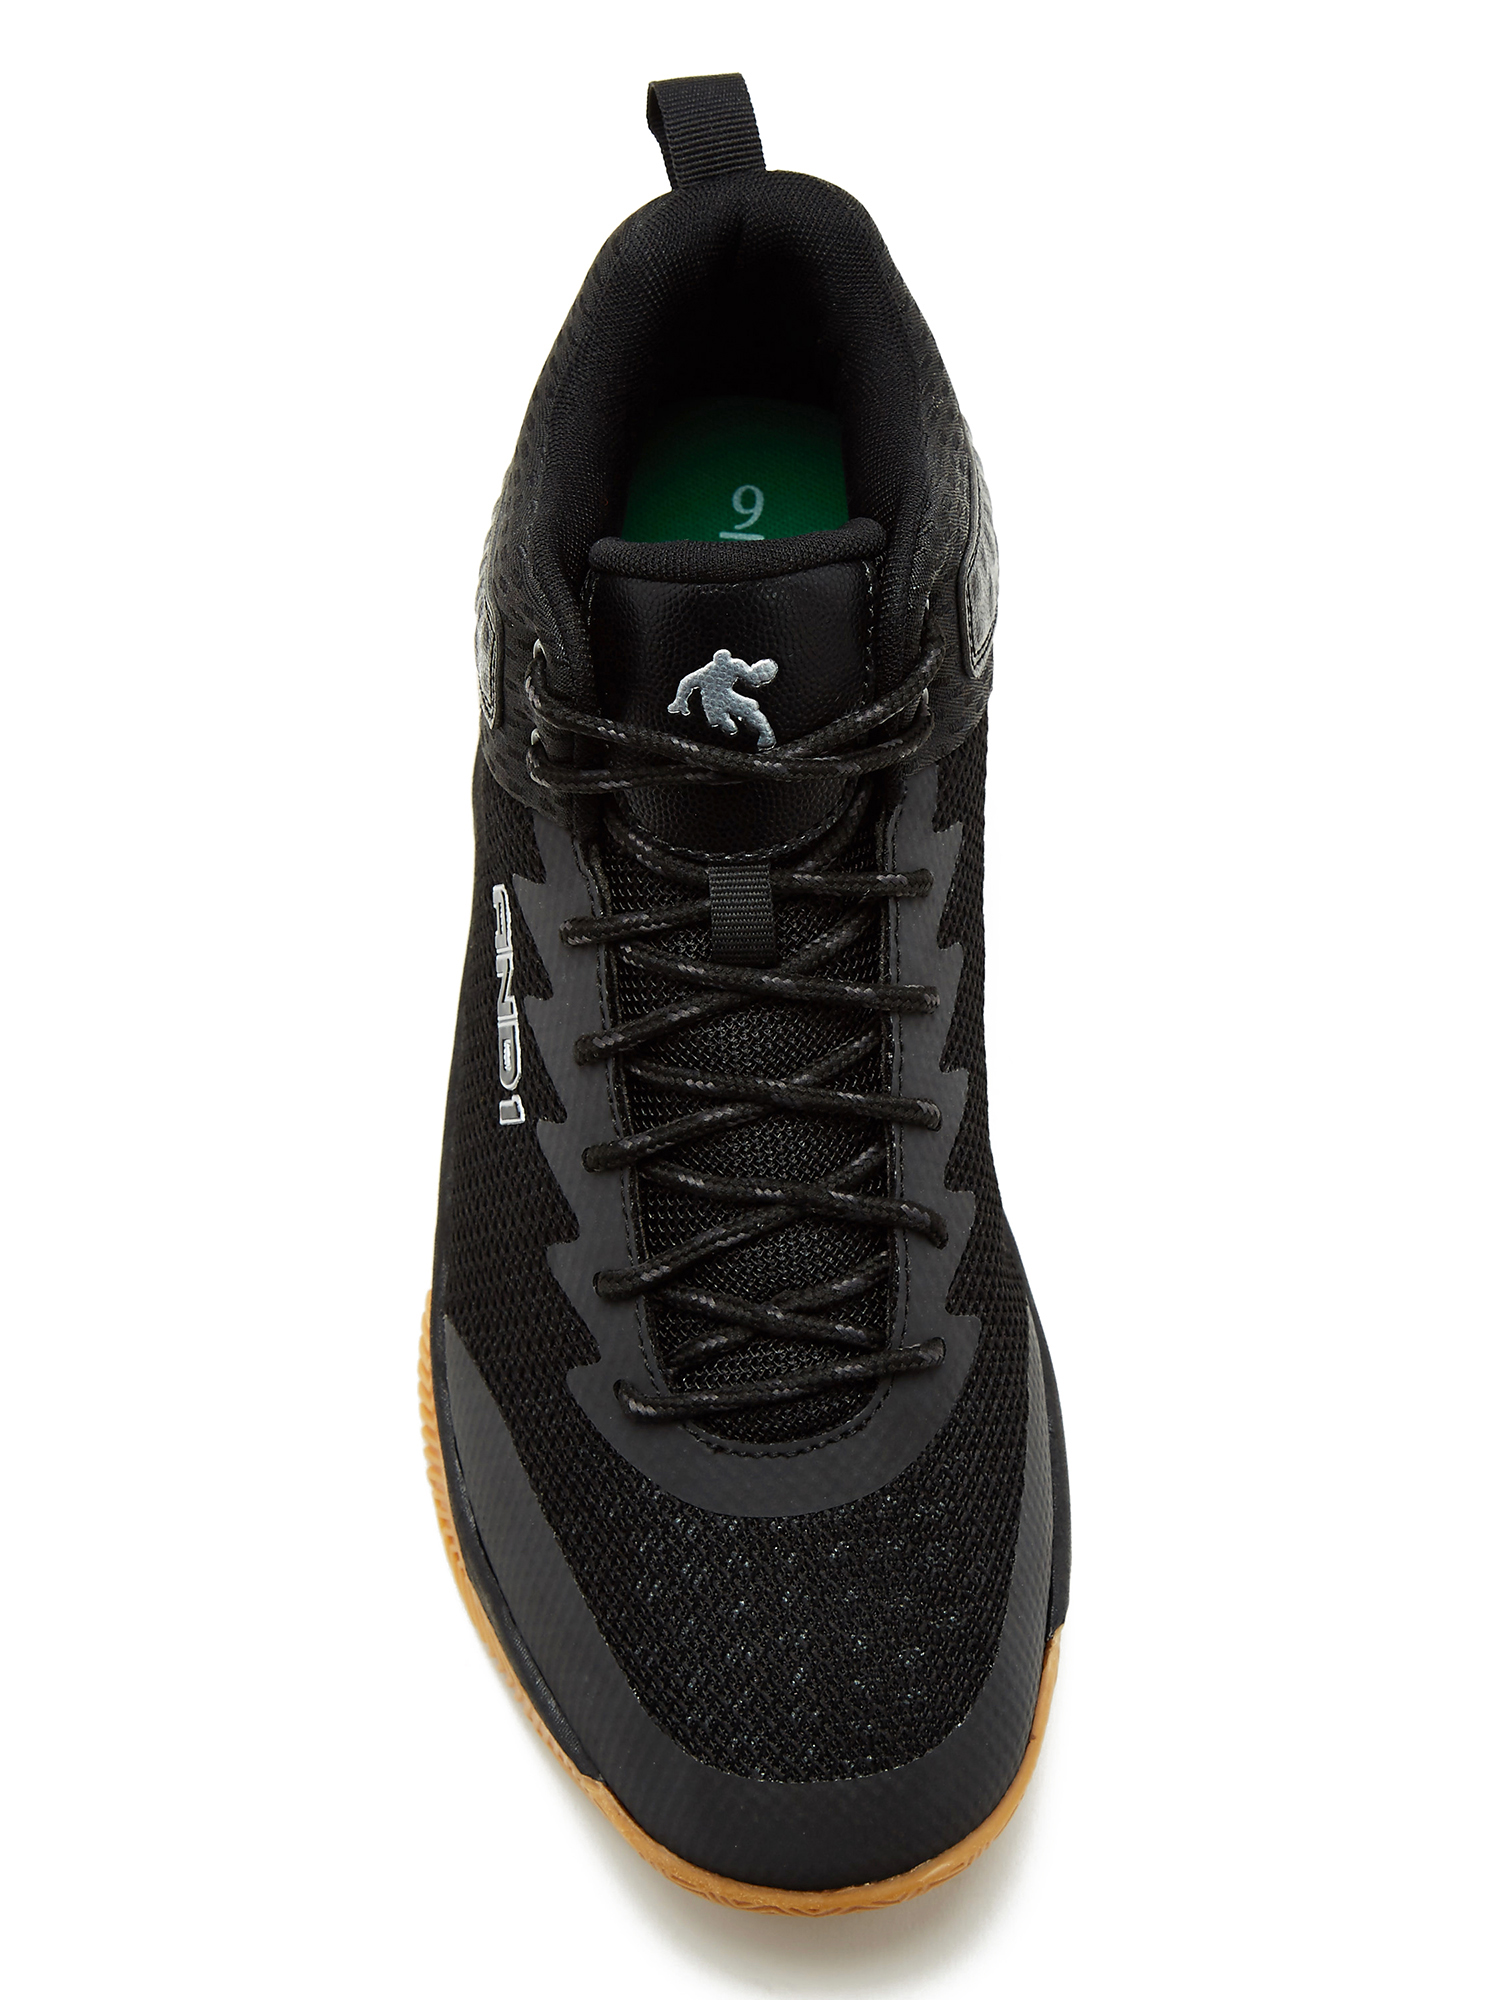 AND 1 Men's Court Shoe - image 3 of 3